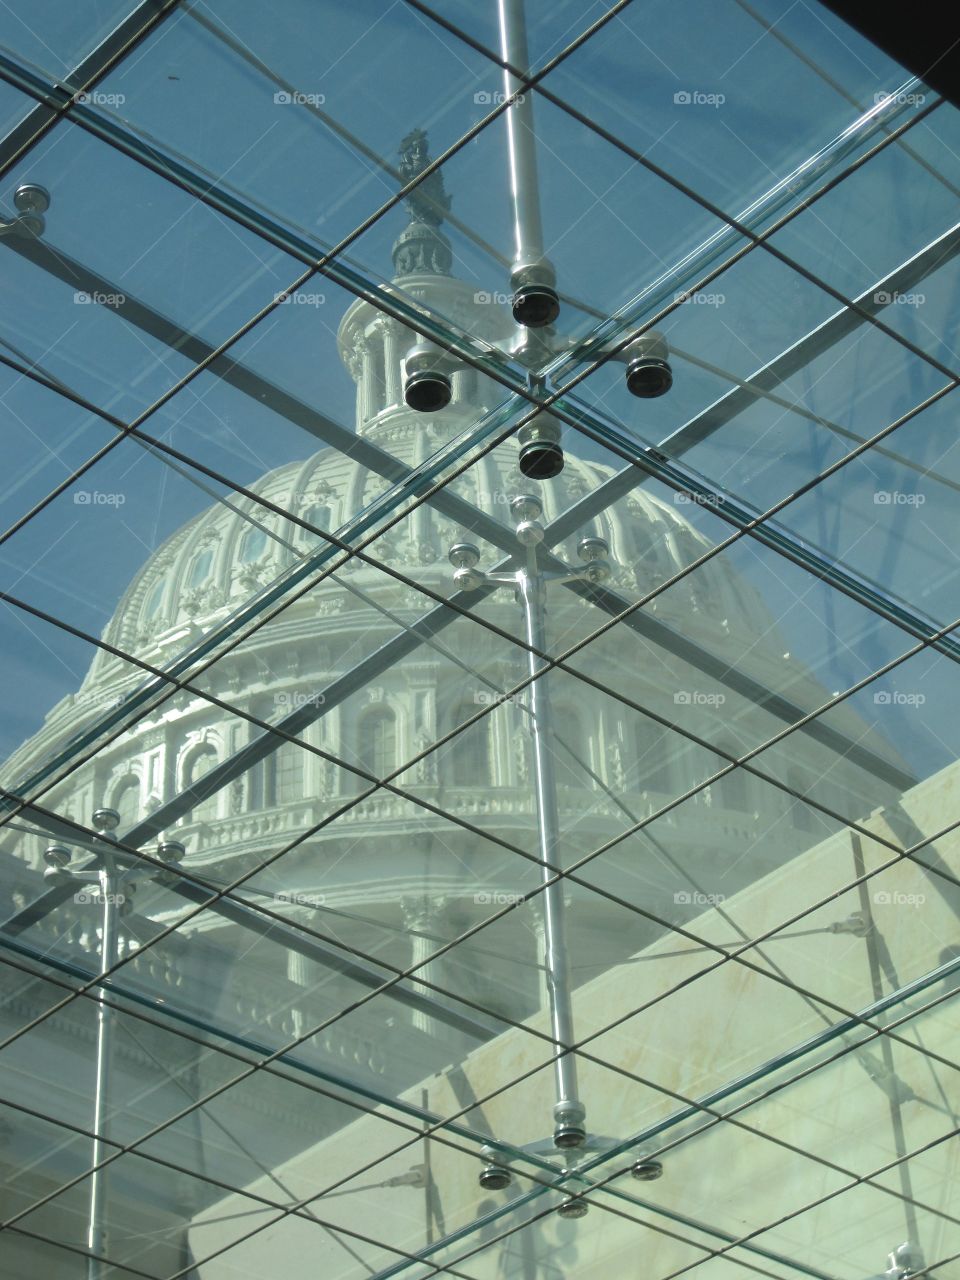 United States Capitol building as seen through visitor center ceiling